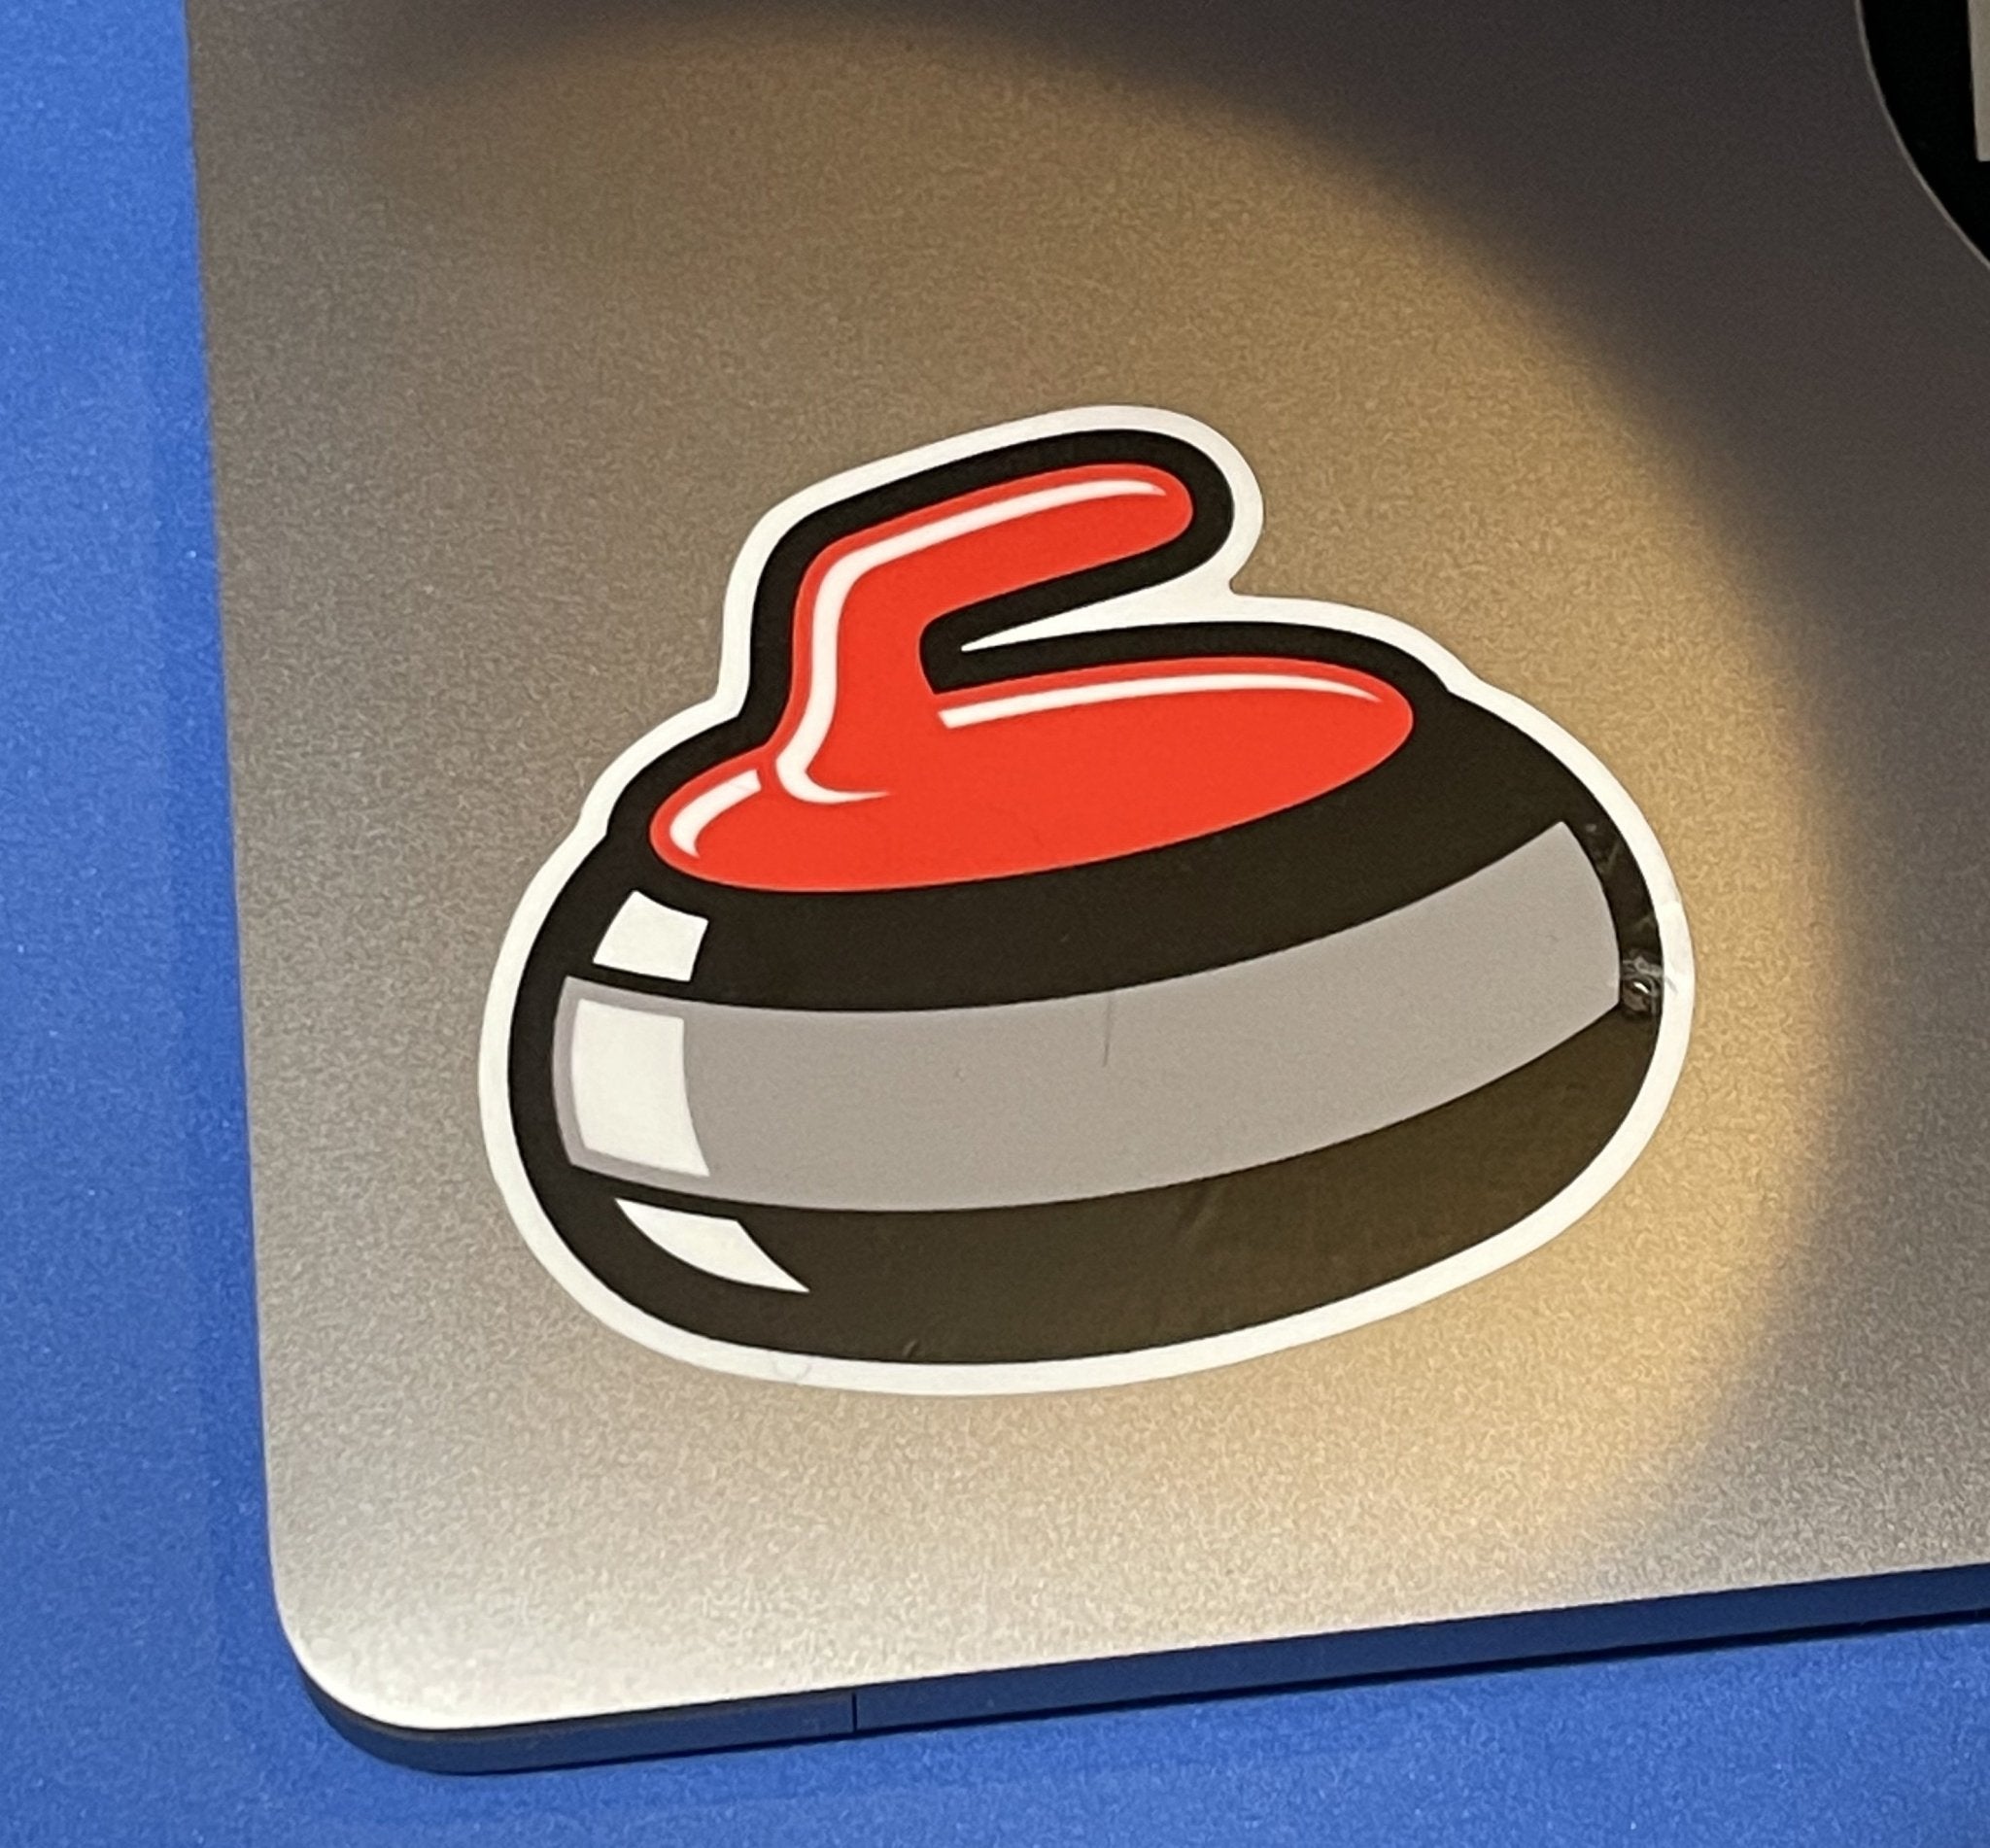 Big Red Rock Curling Laptop Sticker Decal 3"